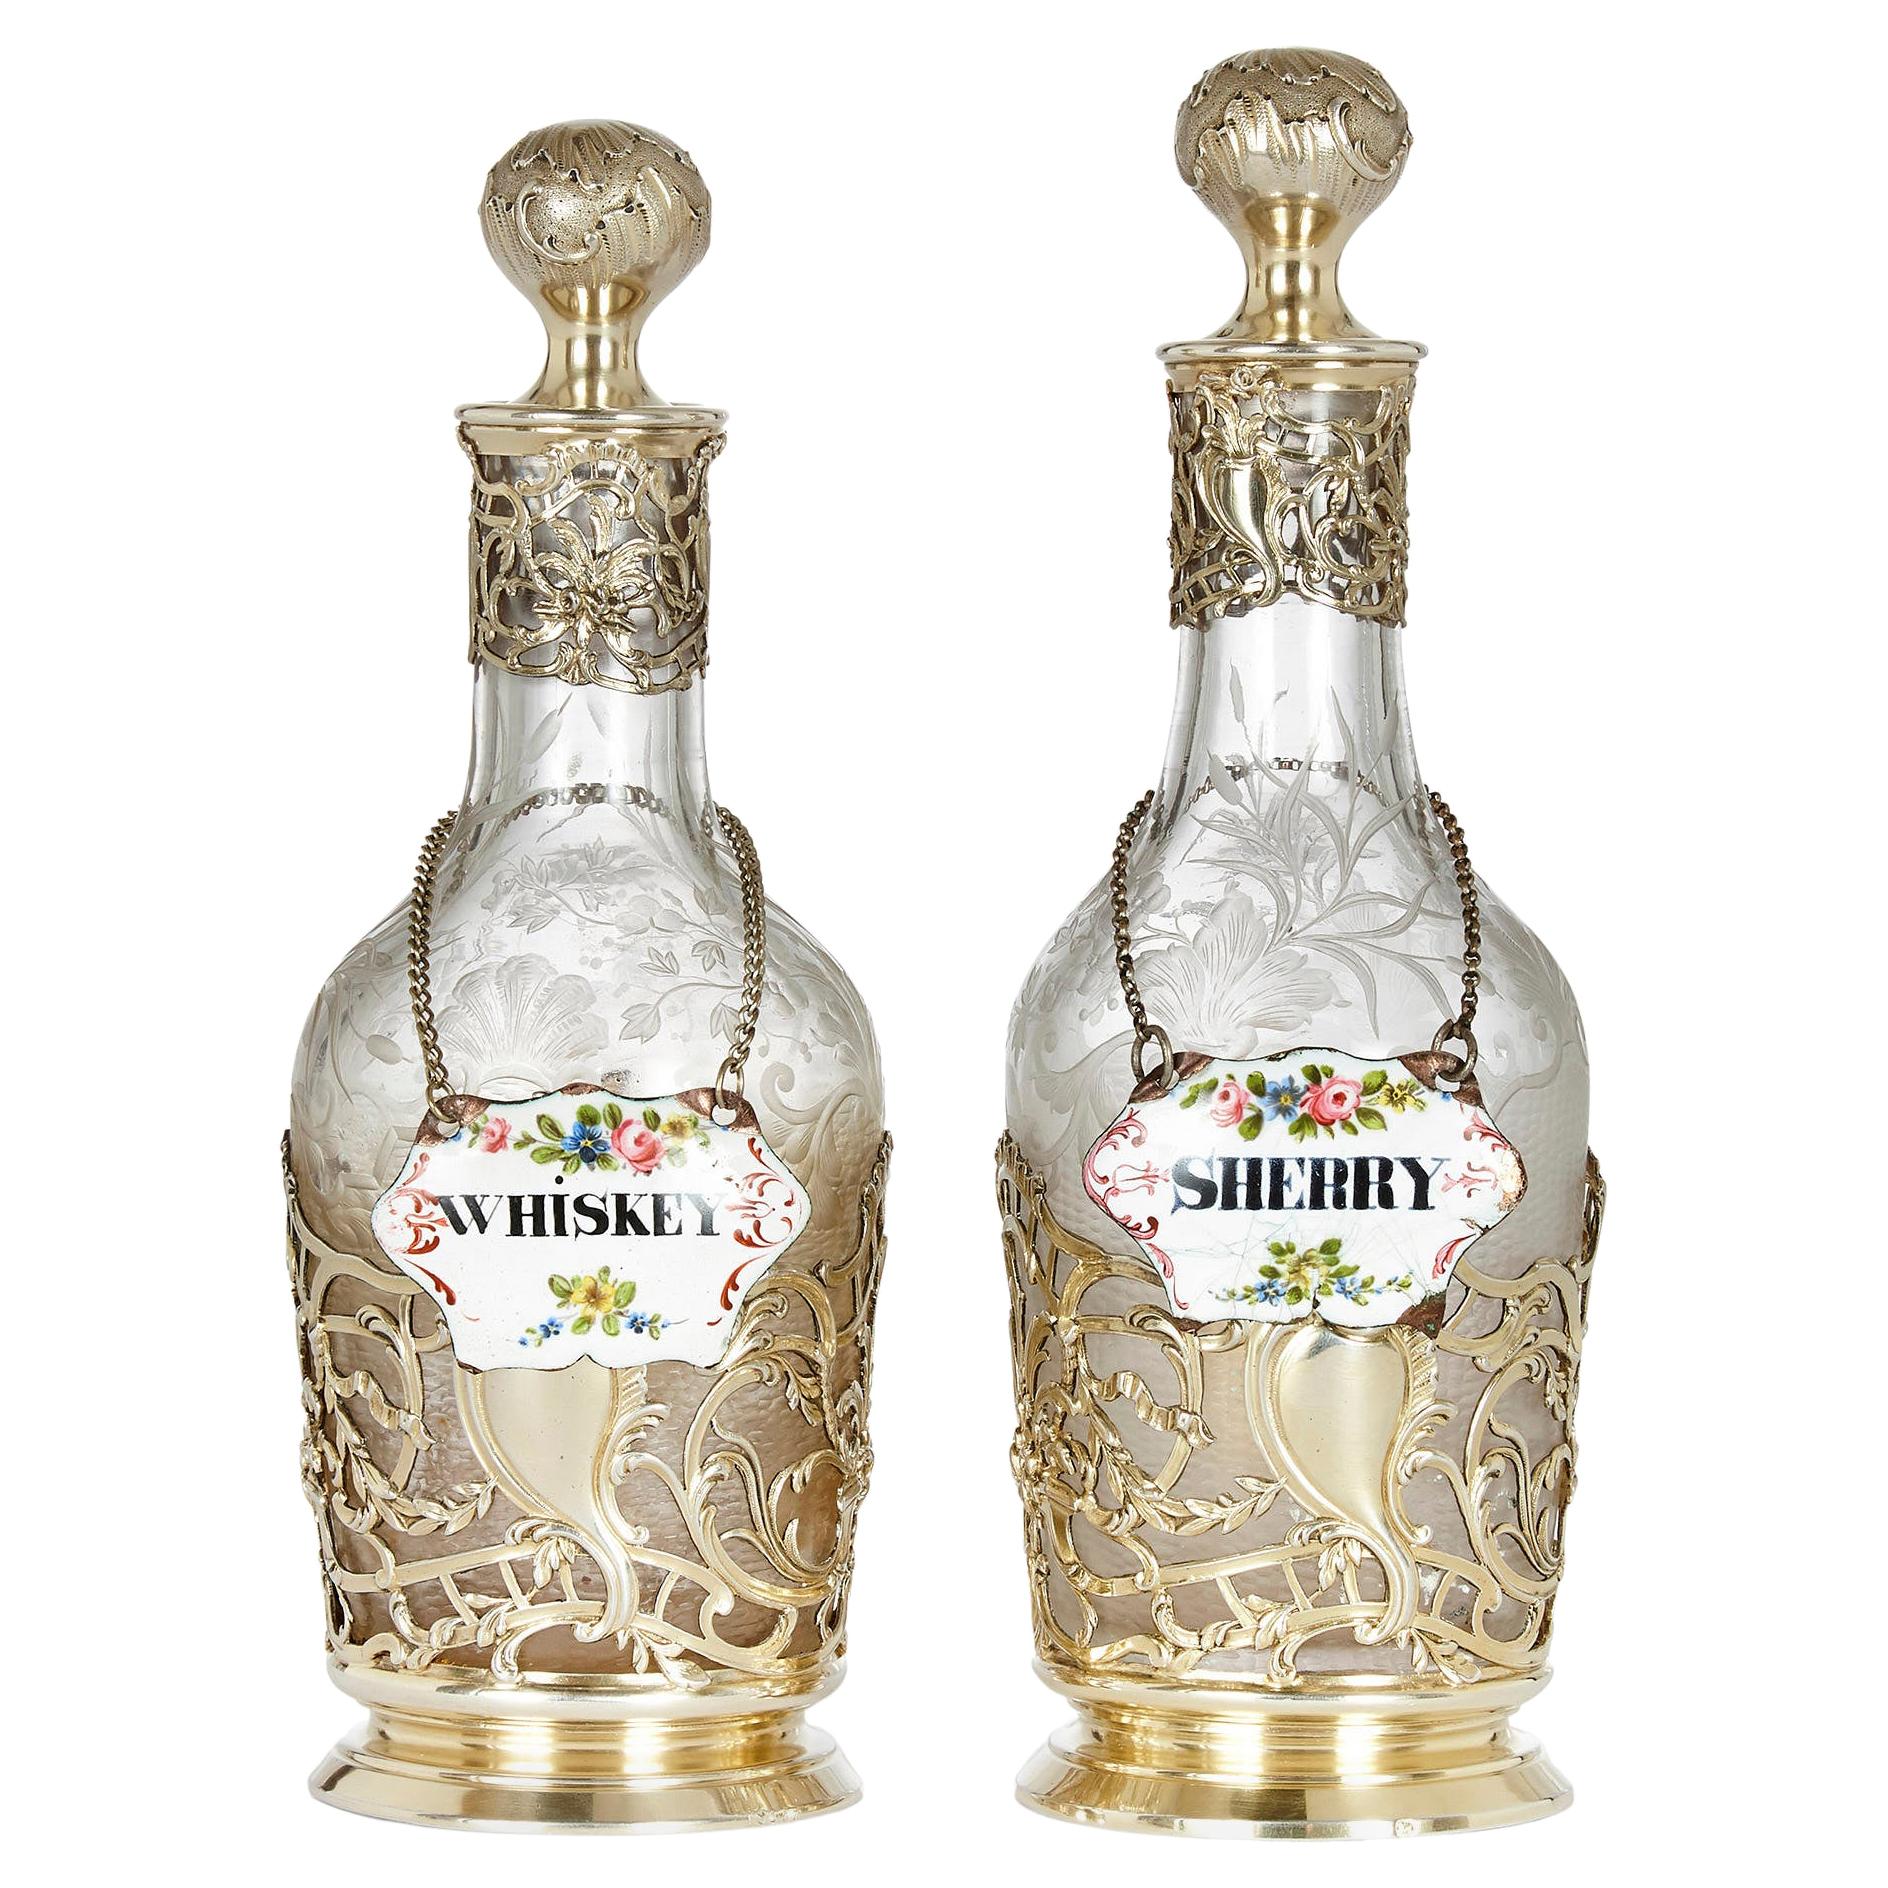 Pair of 19th Century Silver and Crystal Decanters